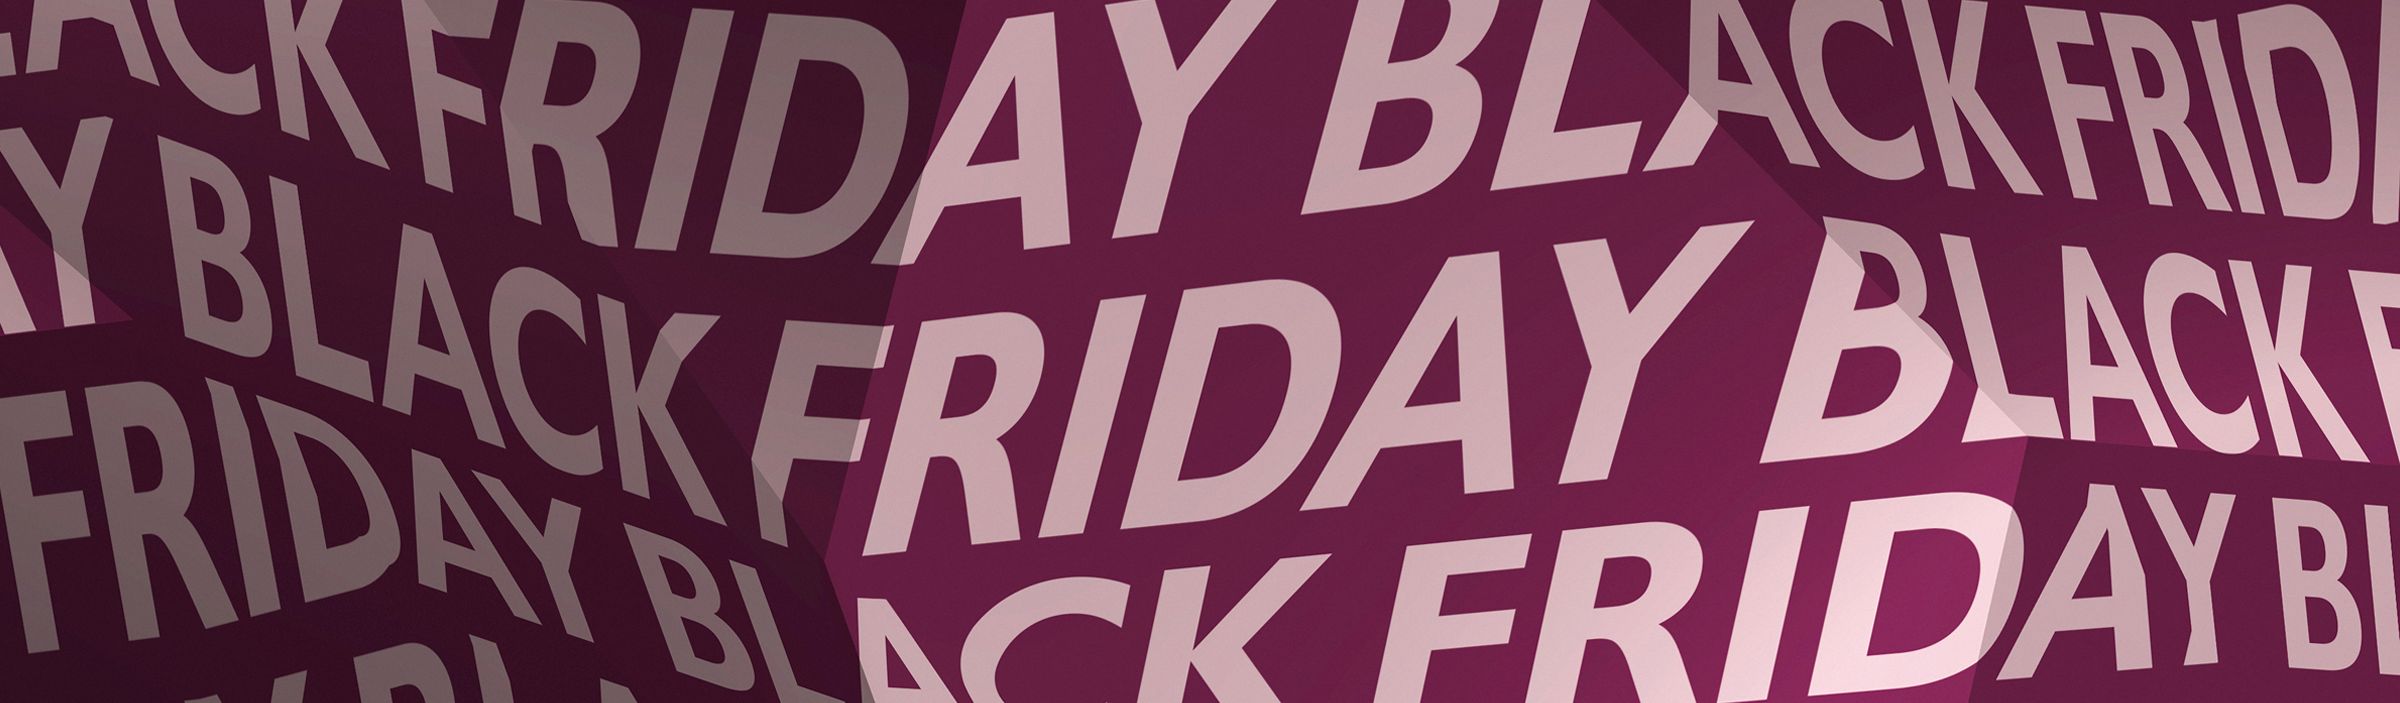 Image of the Black Friday Creative